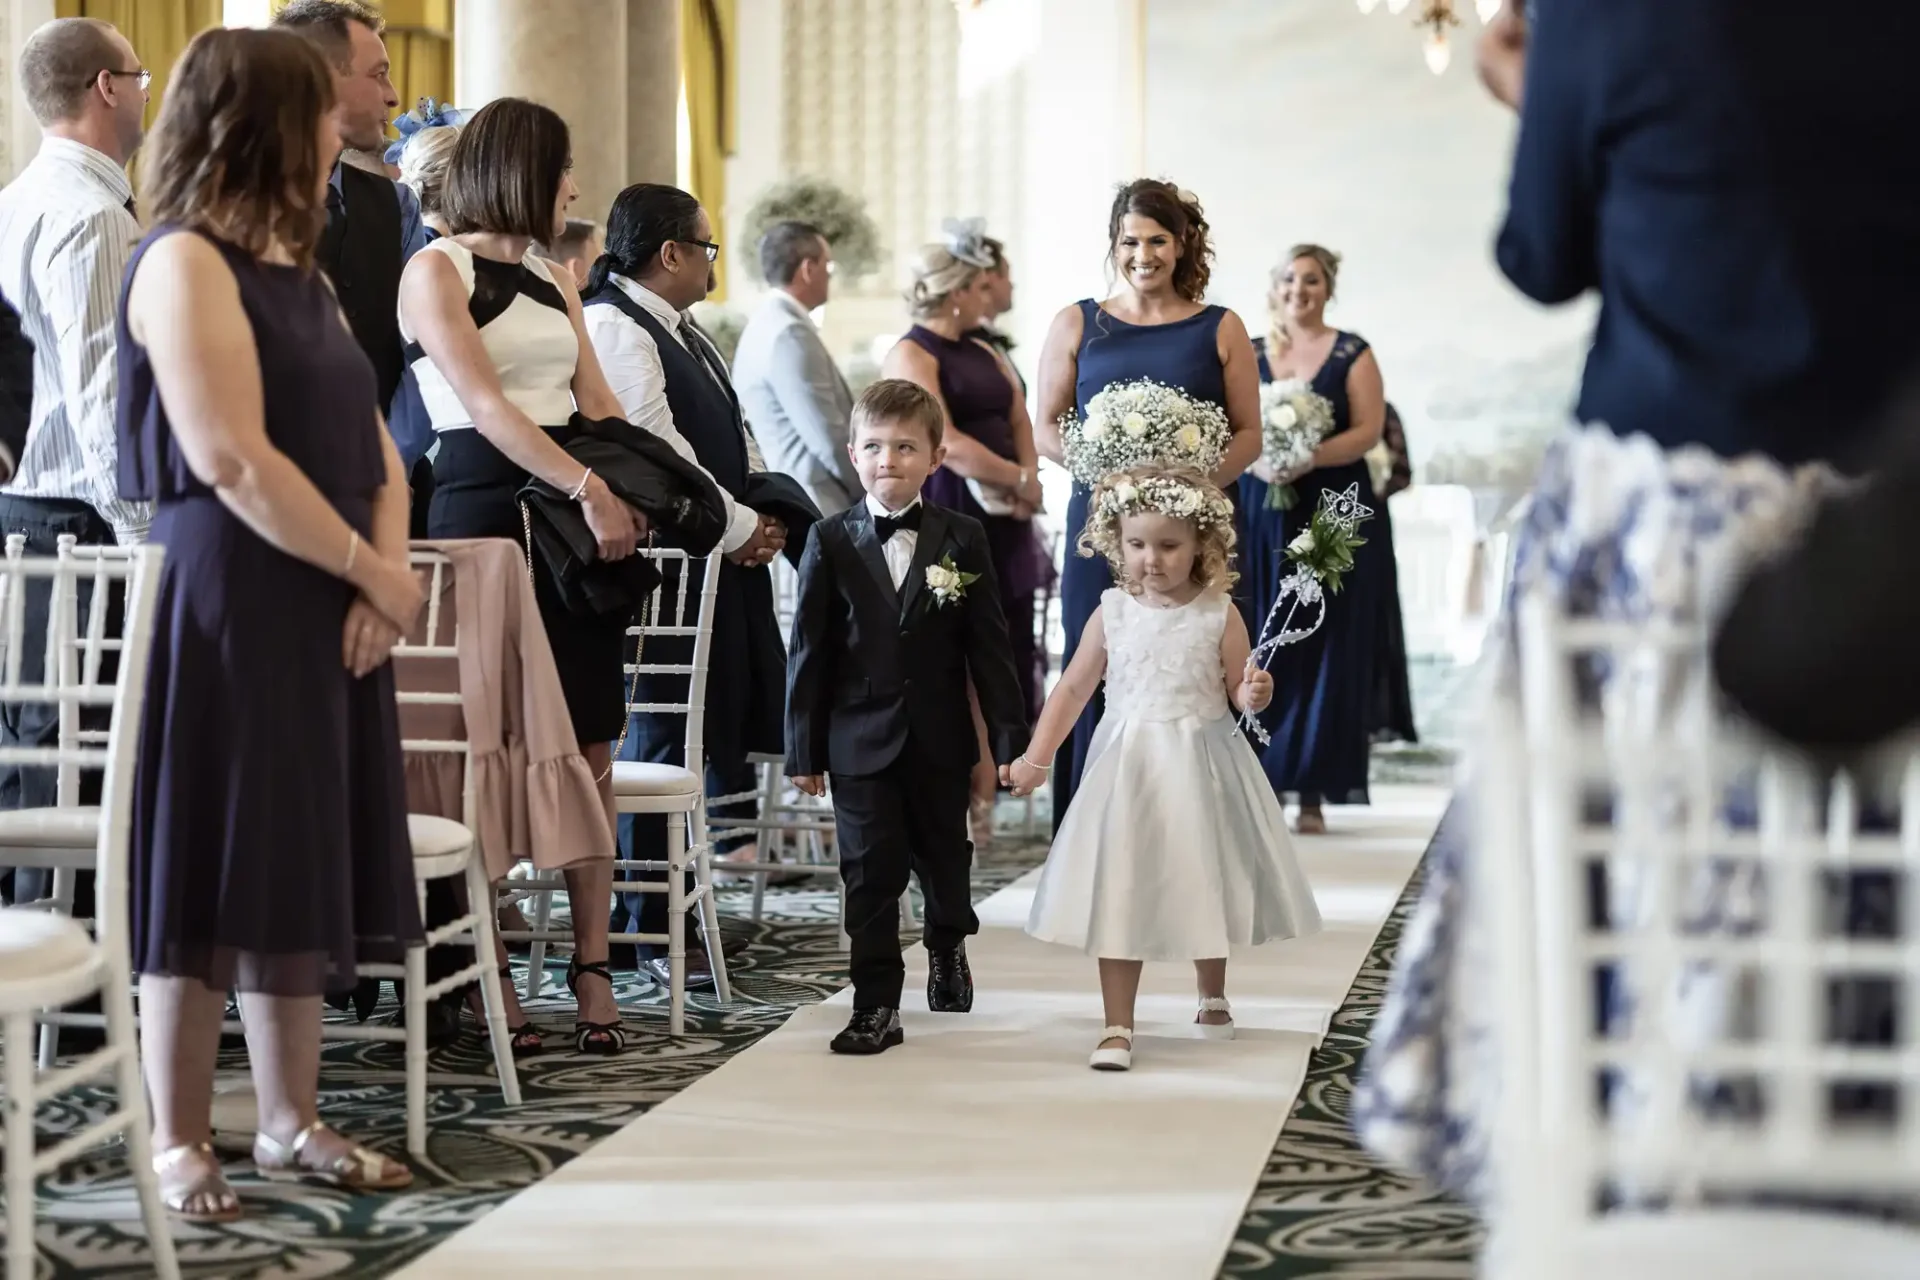 A young boy in a suit and a young girl in a white dress walking down the aisle at a wedding, with guests watching and smiling.